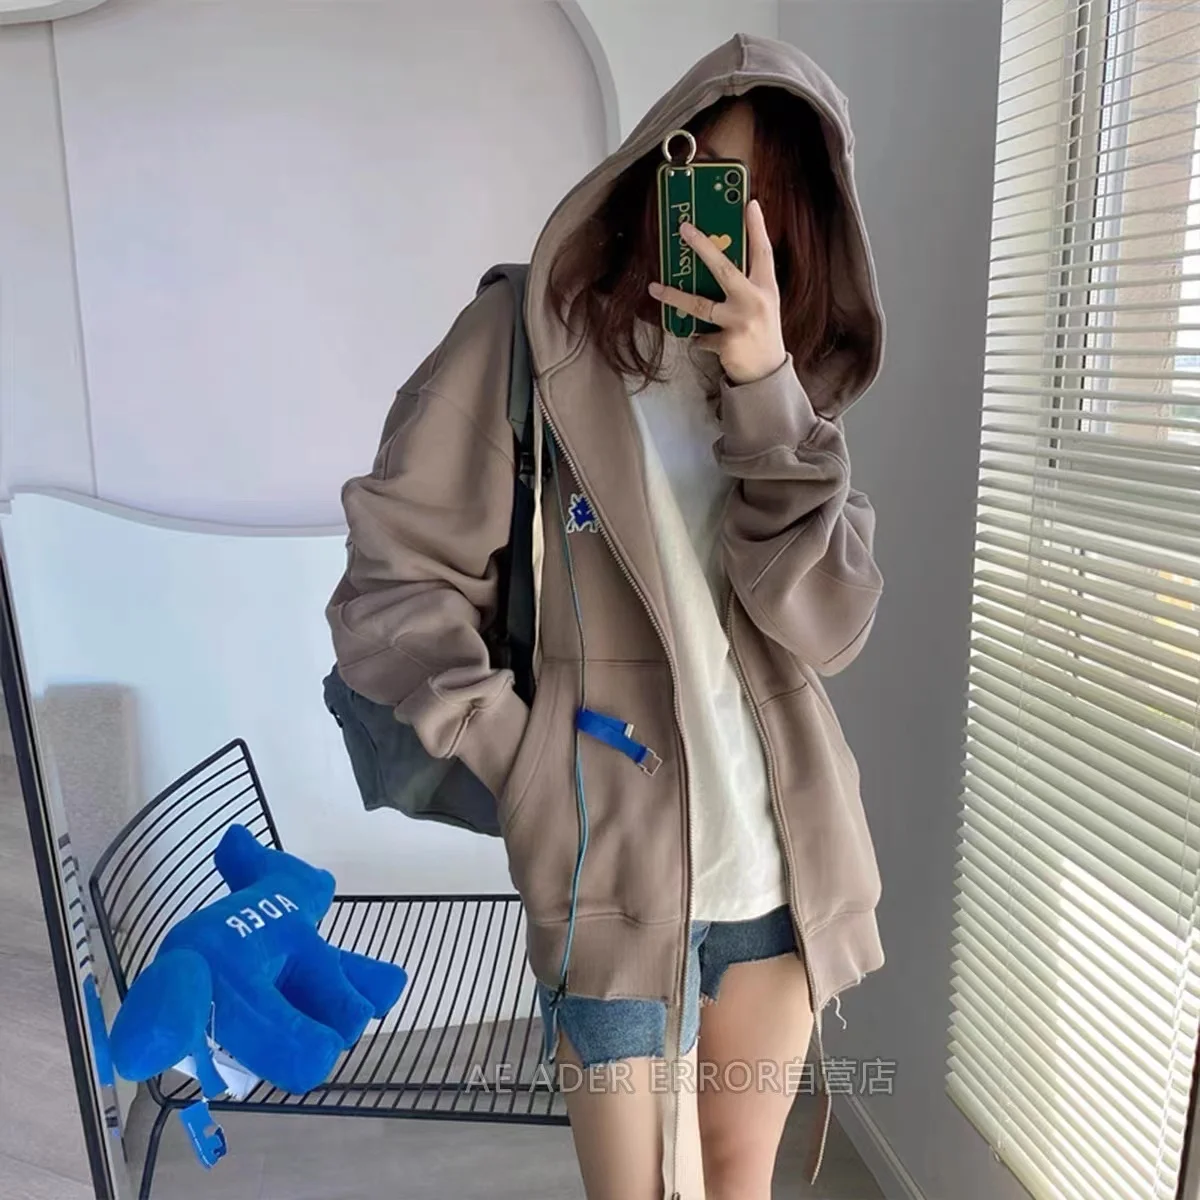 autumn ERROR high spring quality hooded sweater for men and women couples ADER 1:1 little monster zipper jacket loose